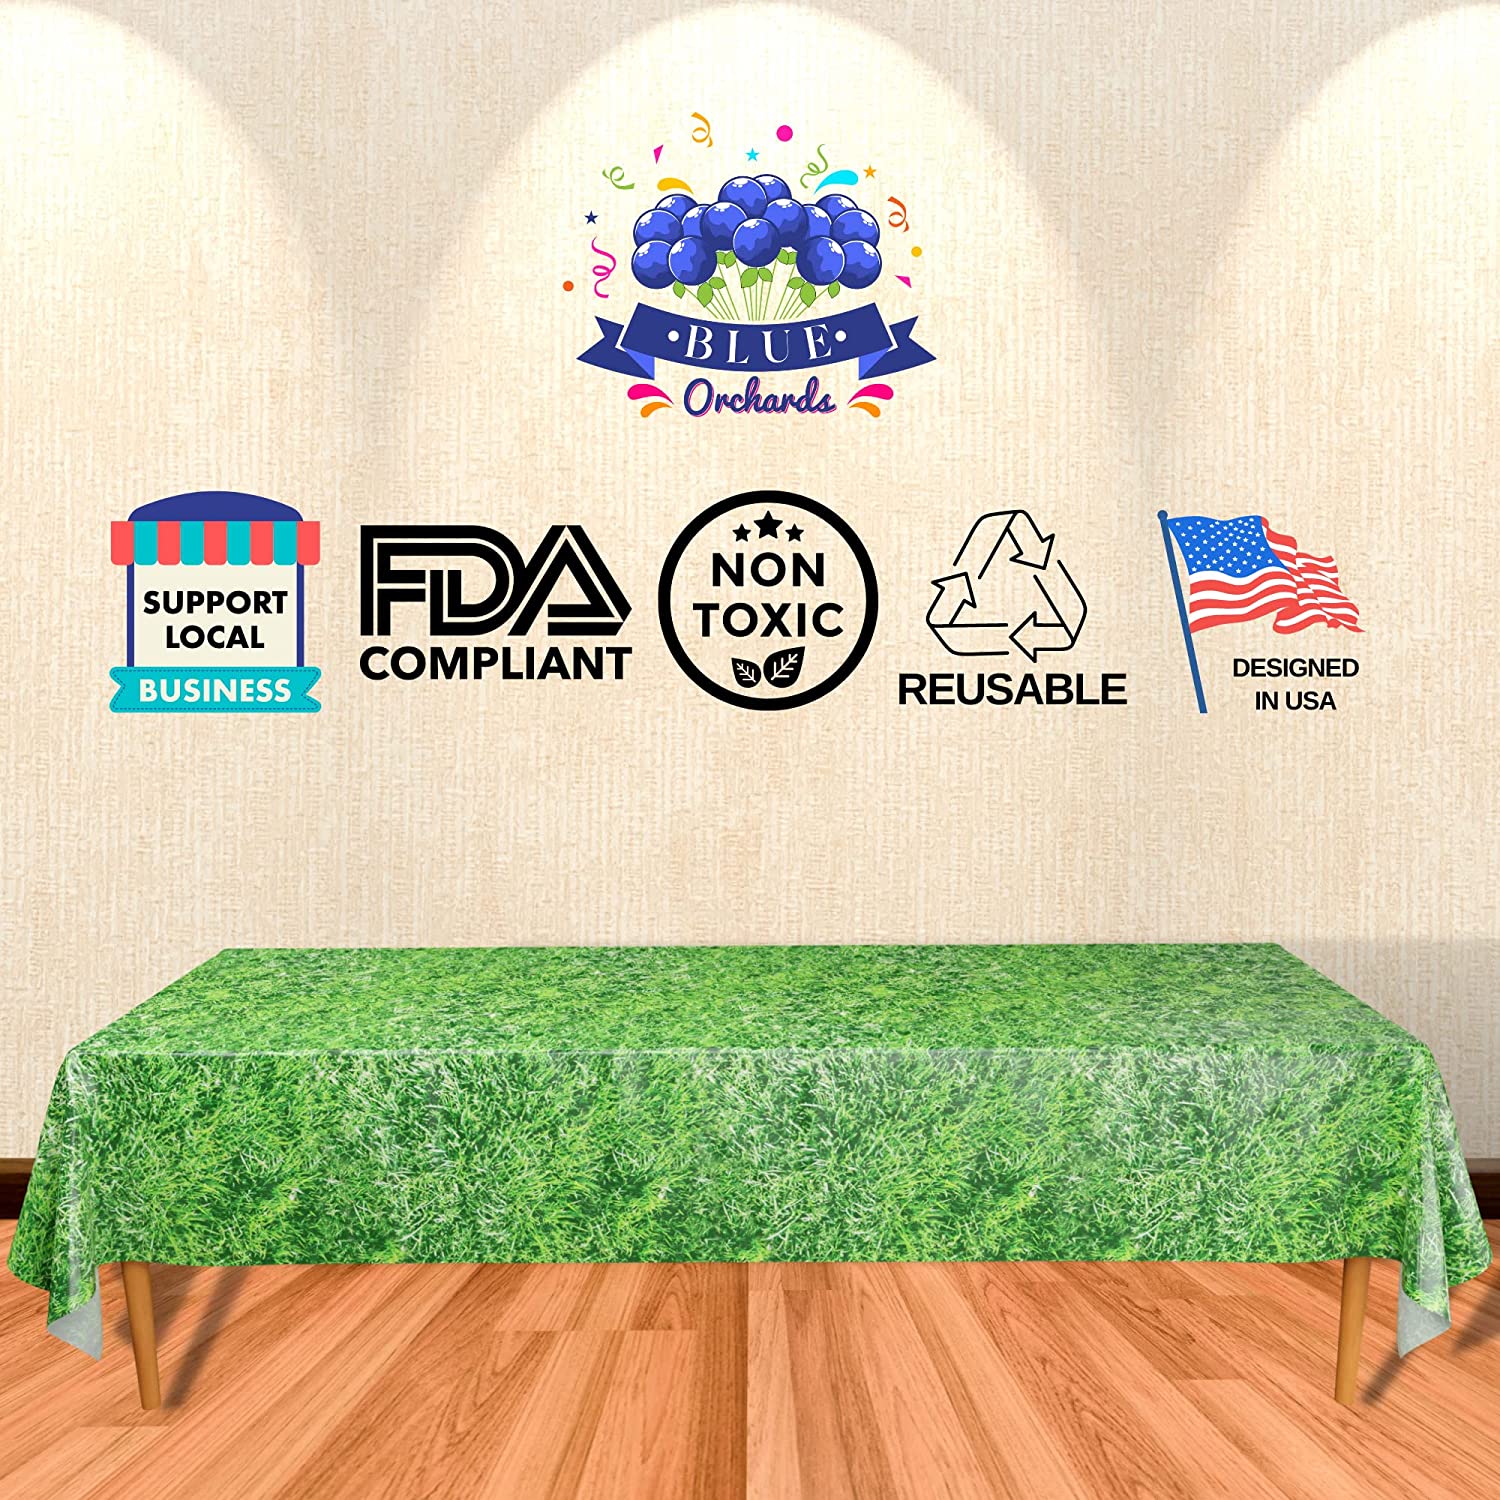 Image of the Grass Table Covers, a pack of two measuring 54"x108". These table covers are perfect for a variety of nature-themed parties, including jungle parties, woodland birthdays, and safari-themed events. They feature a realistic grass design and are FDA compliant, non-toxic, and reusable. Designed in the USA, these table covers are plastic and perfect choice for your party decor.